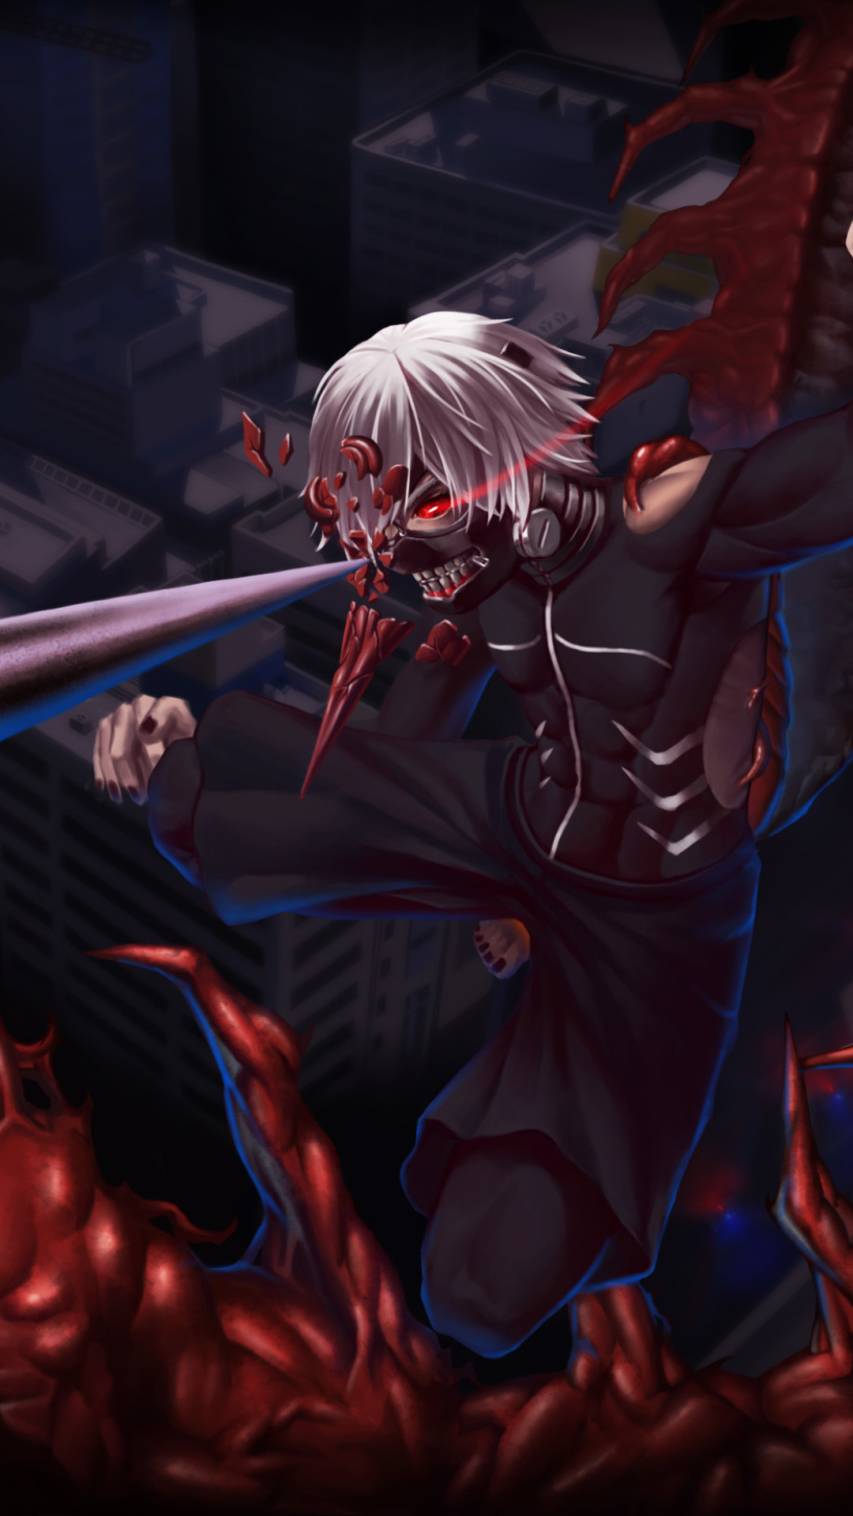 Cool Tokyo Ghoul Wallpapers for iPhone